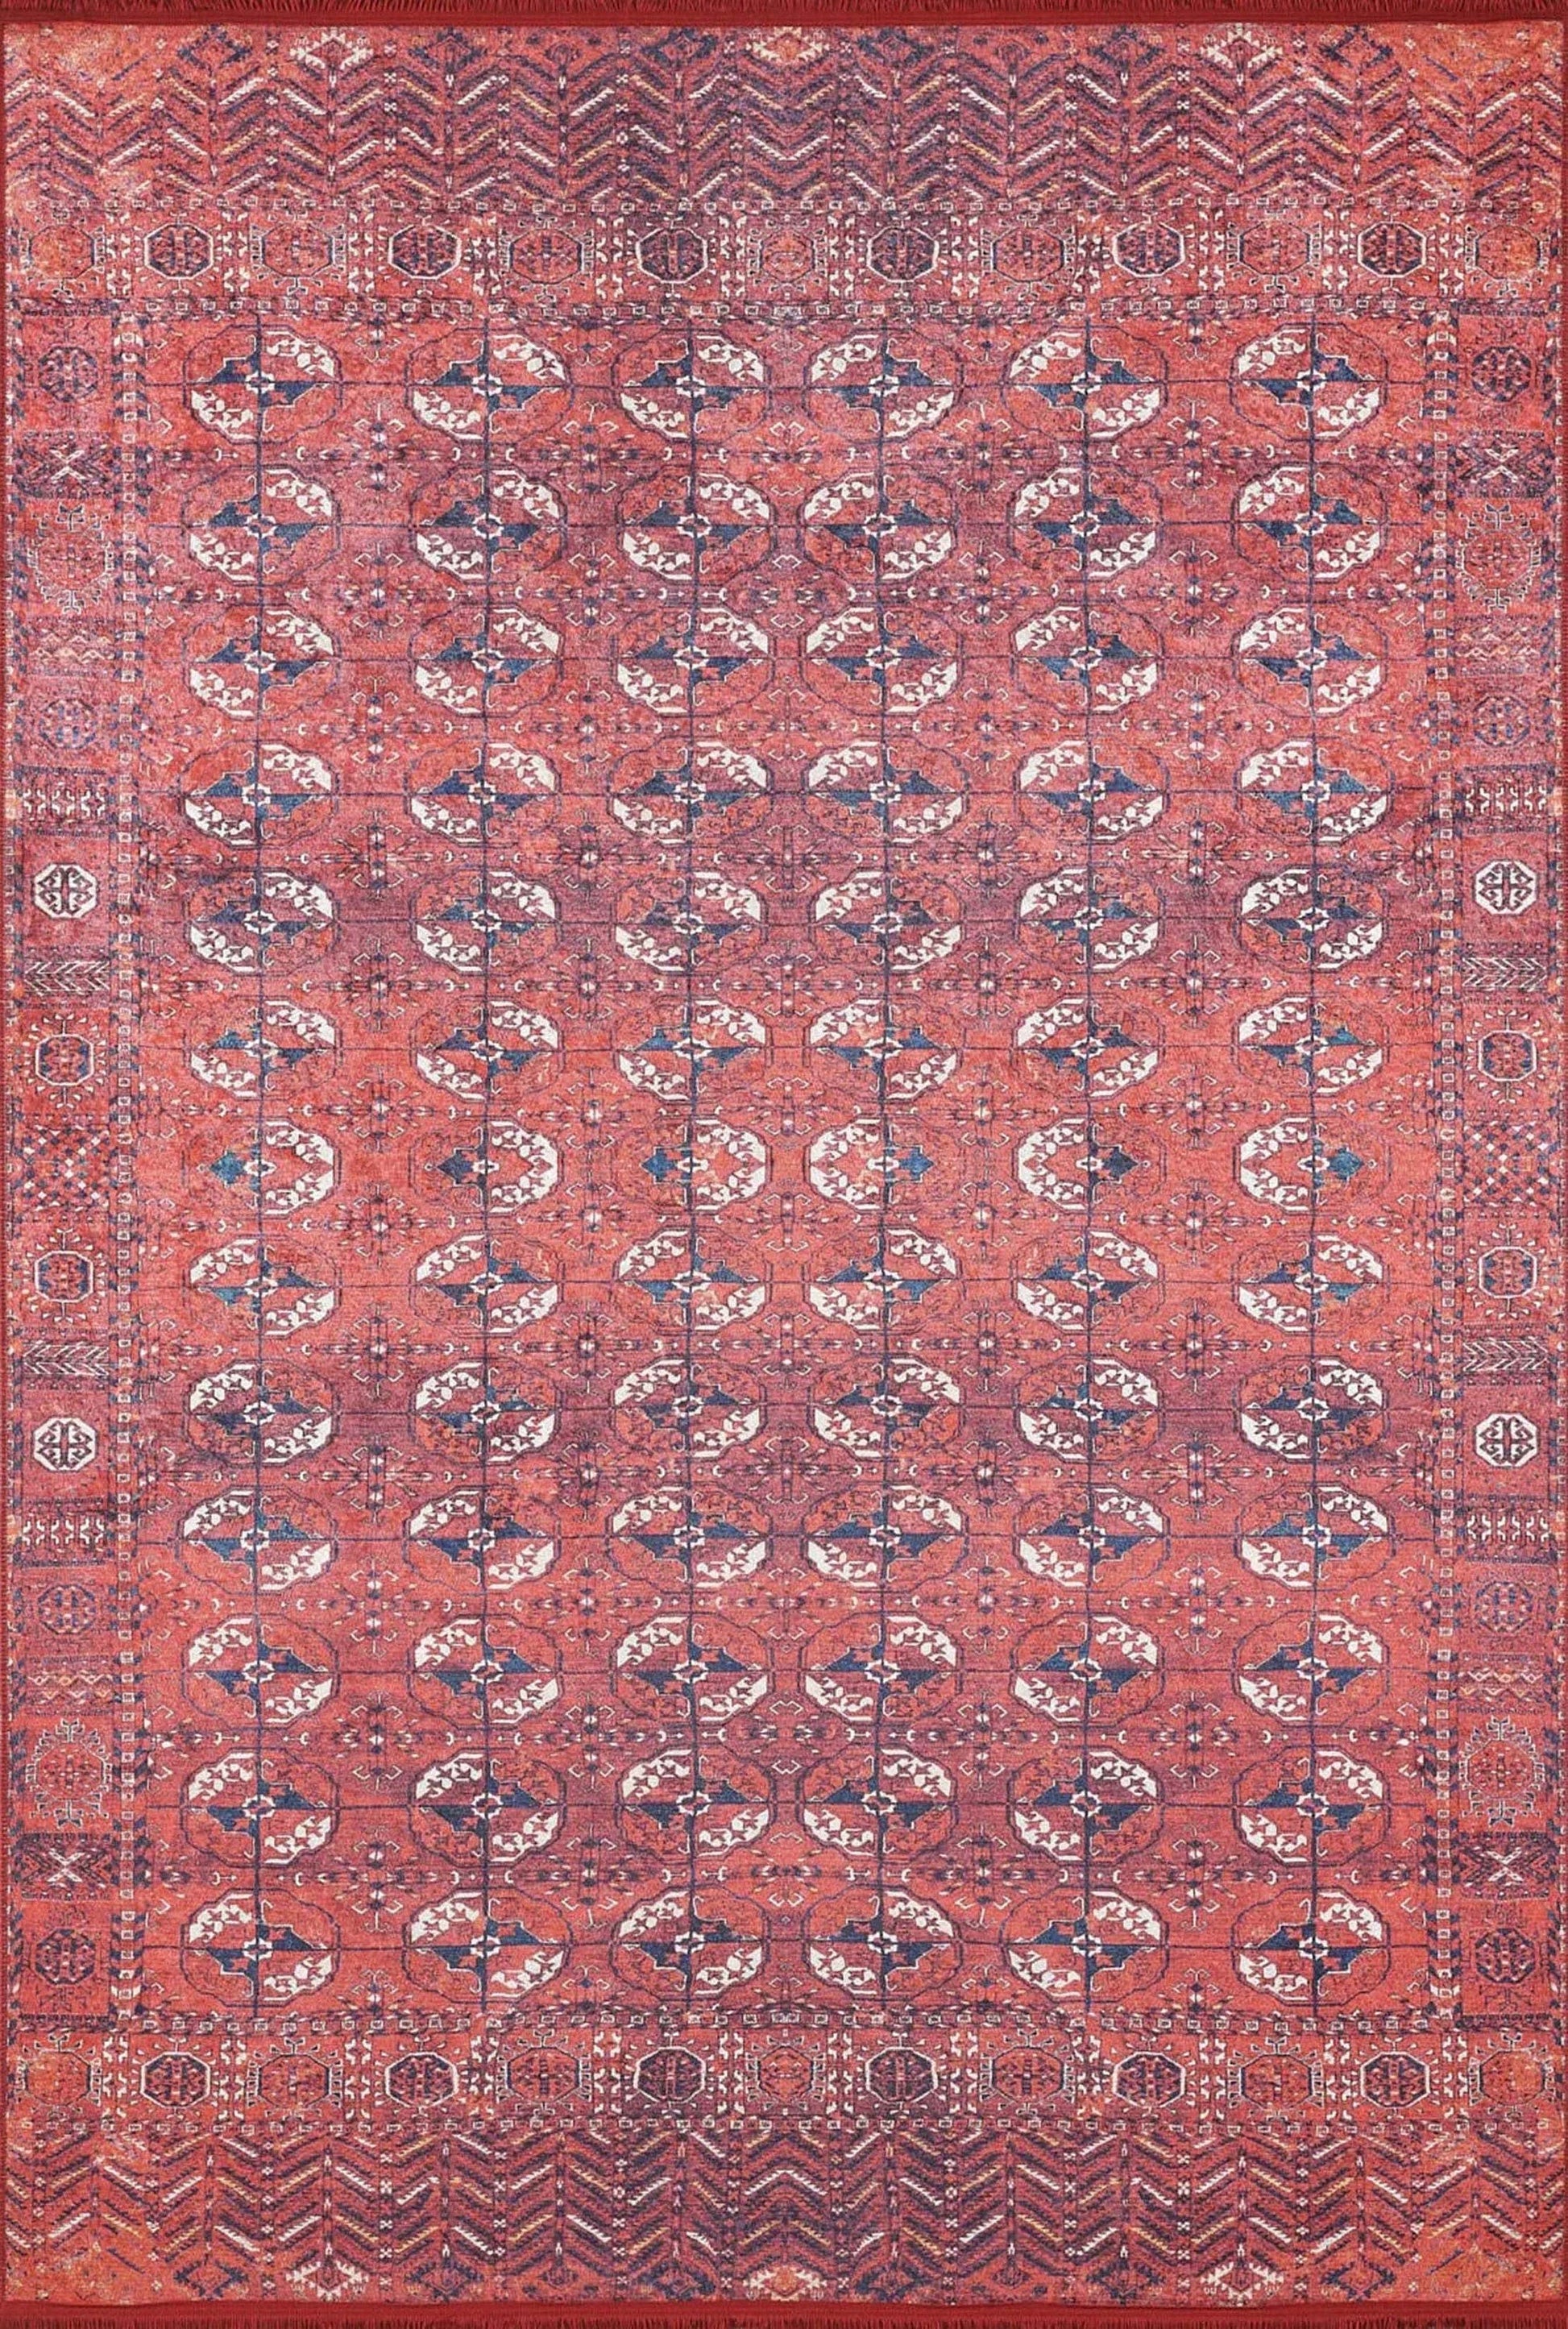 2x3 Turkish Rug, Orange & Silver Small Area Rugs 3x5 4x6 Traditional V –  Fame